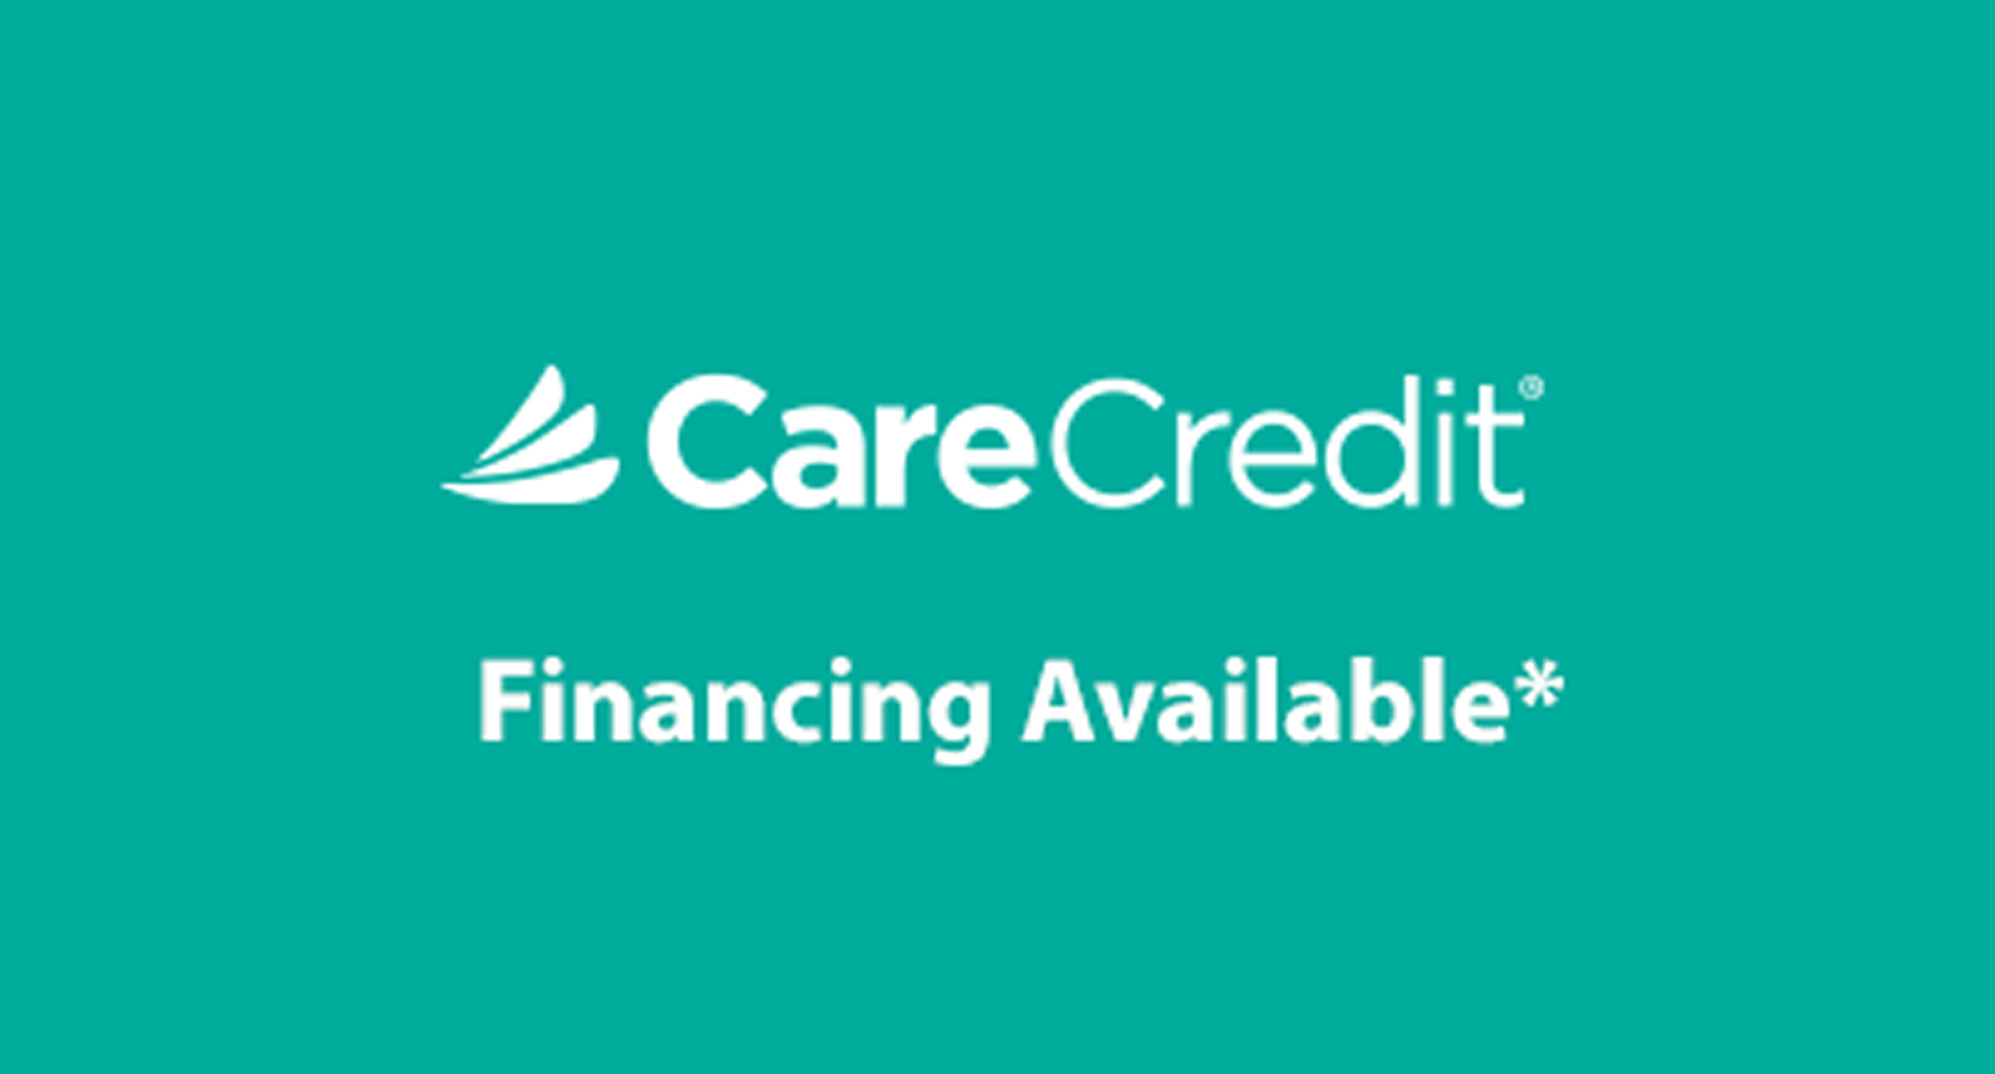 CareCredit Financing Available